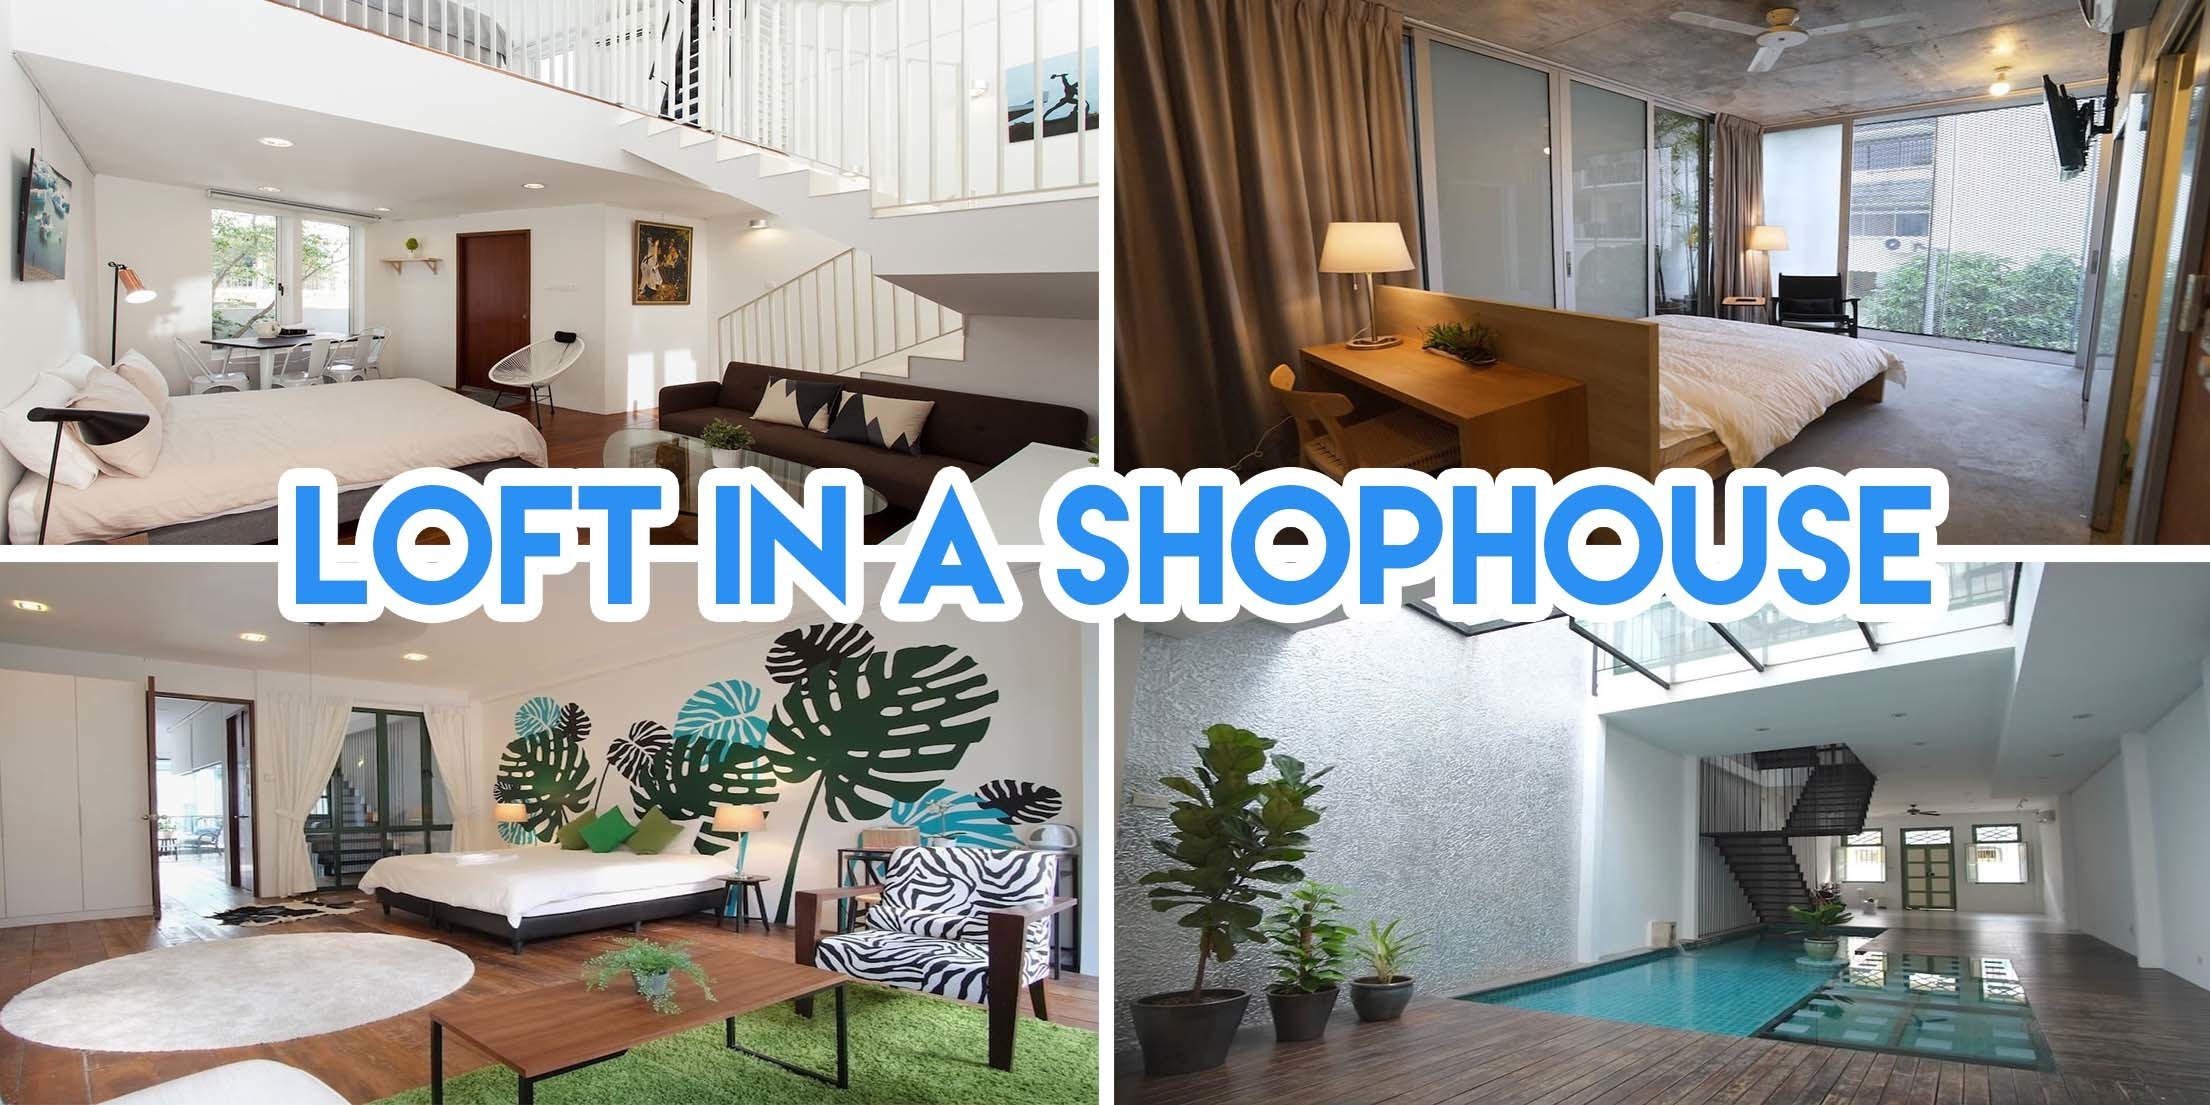 10 Secret Staycation Spots In Singapore So Obscure, They're Not Found On Hotel Directories